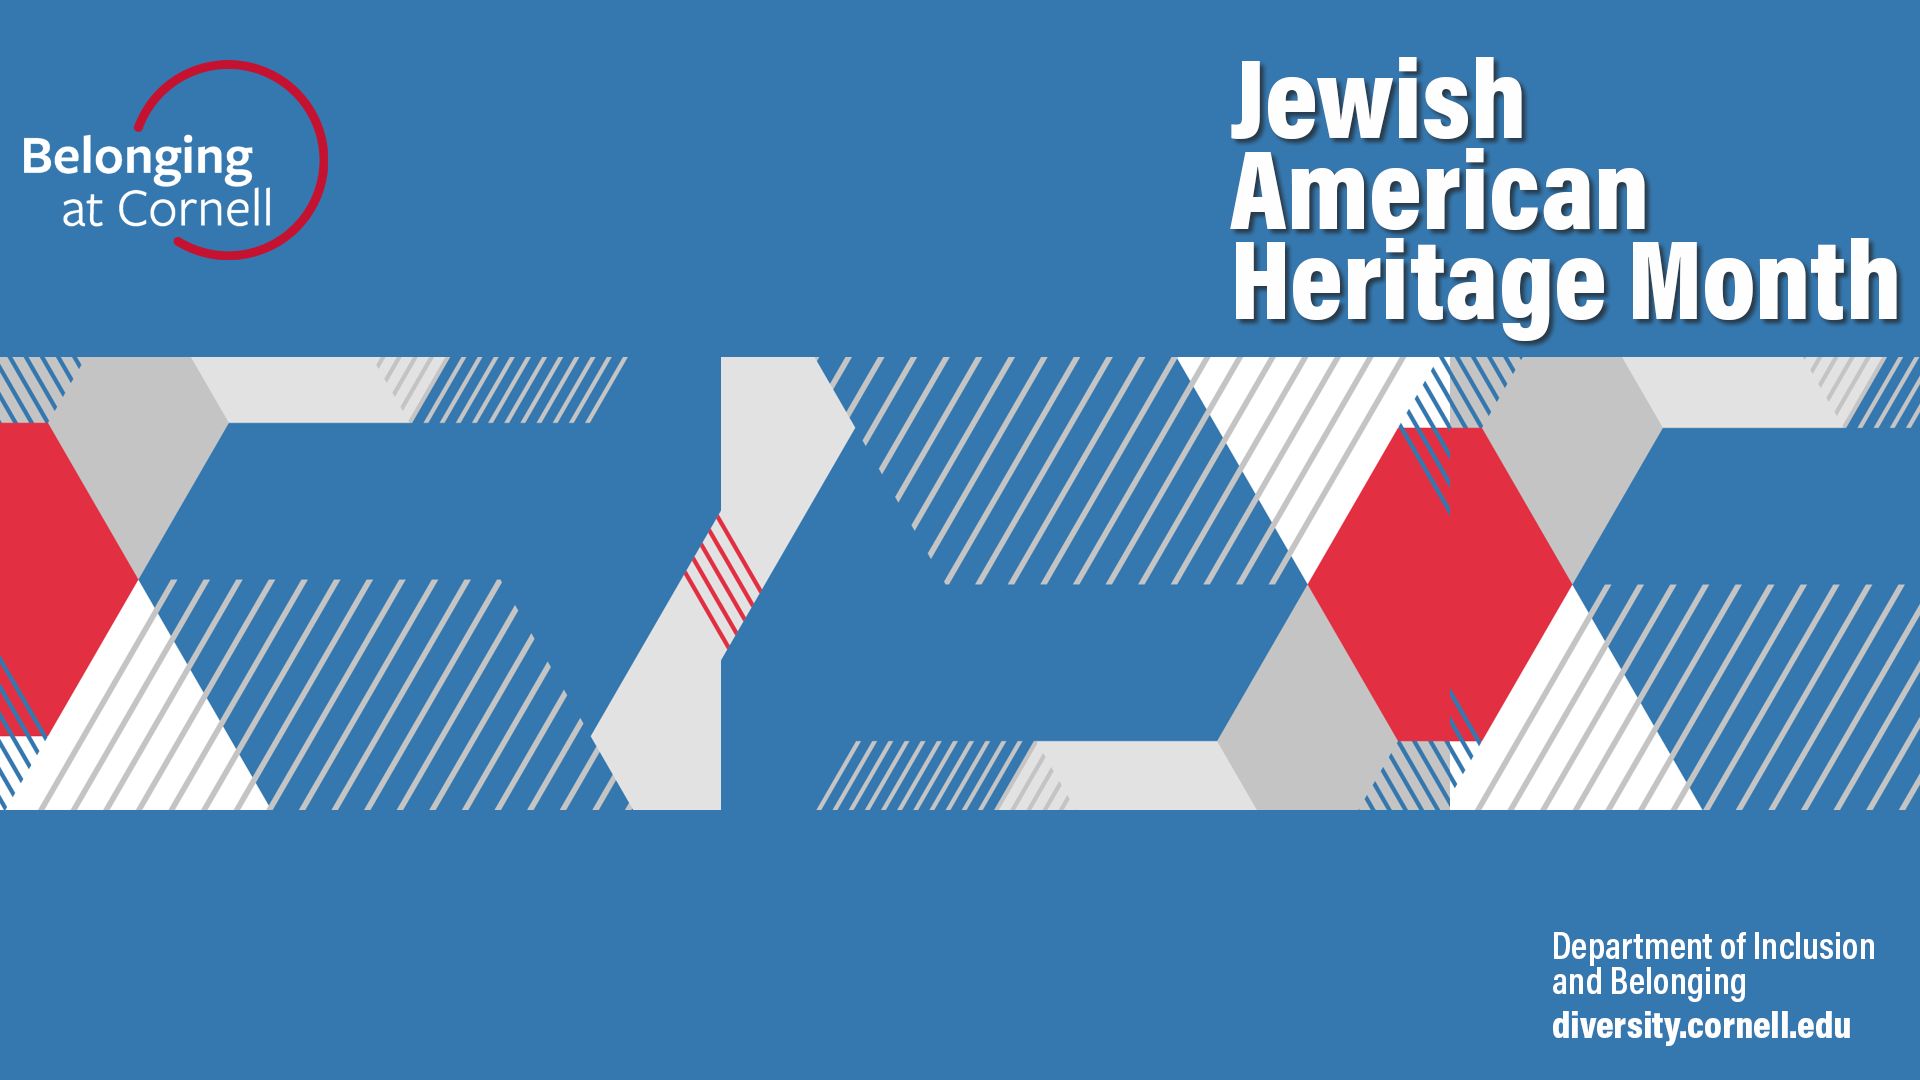 Zoom background (plain) visual in honor of Jewish American Heritage Month